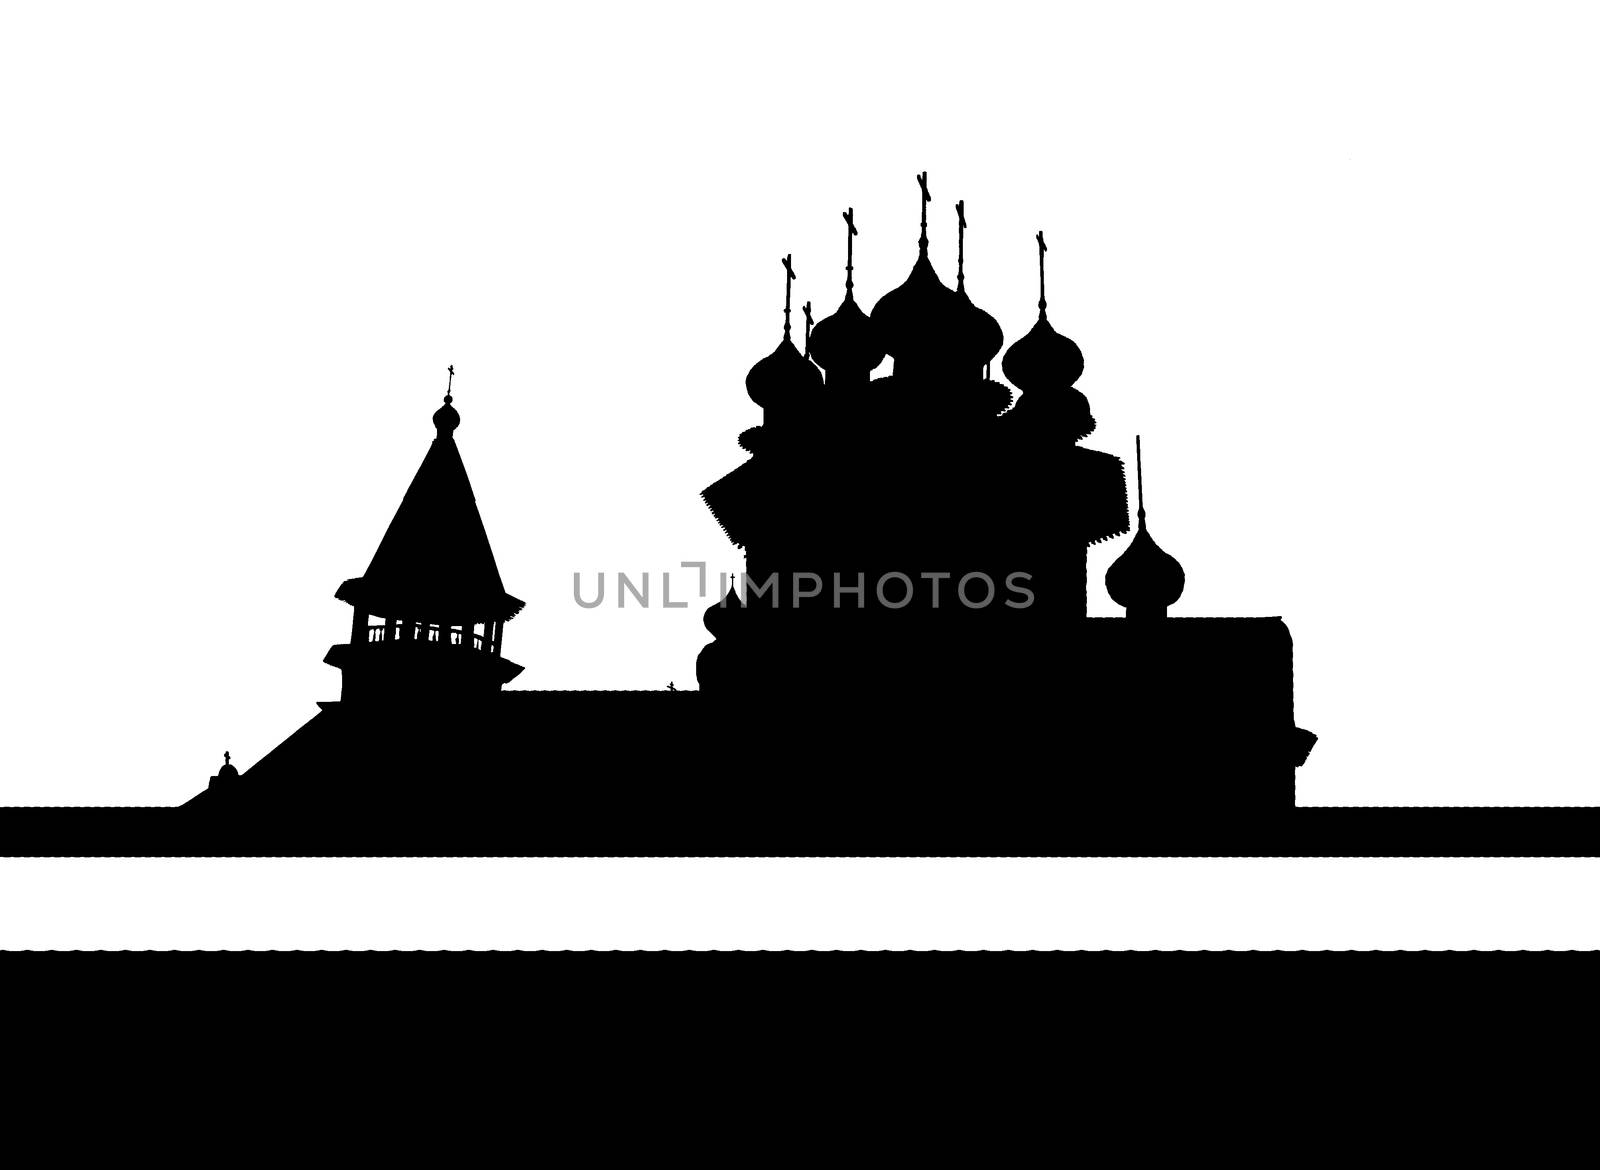 The outline of the multi-domed Church of the eighteenth century on a white background in black.